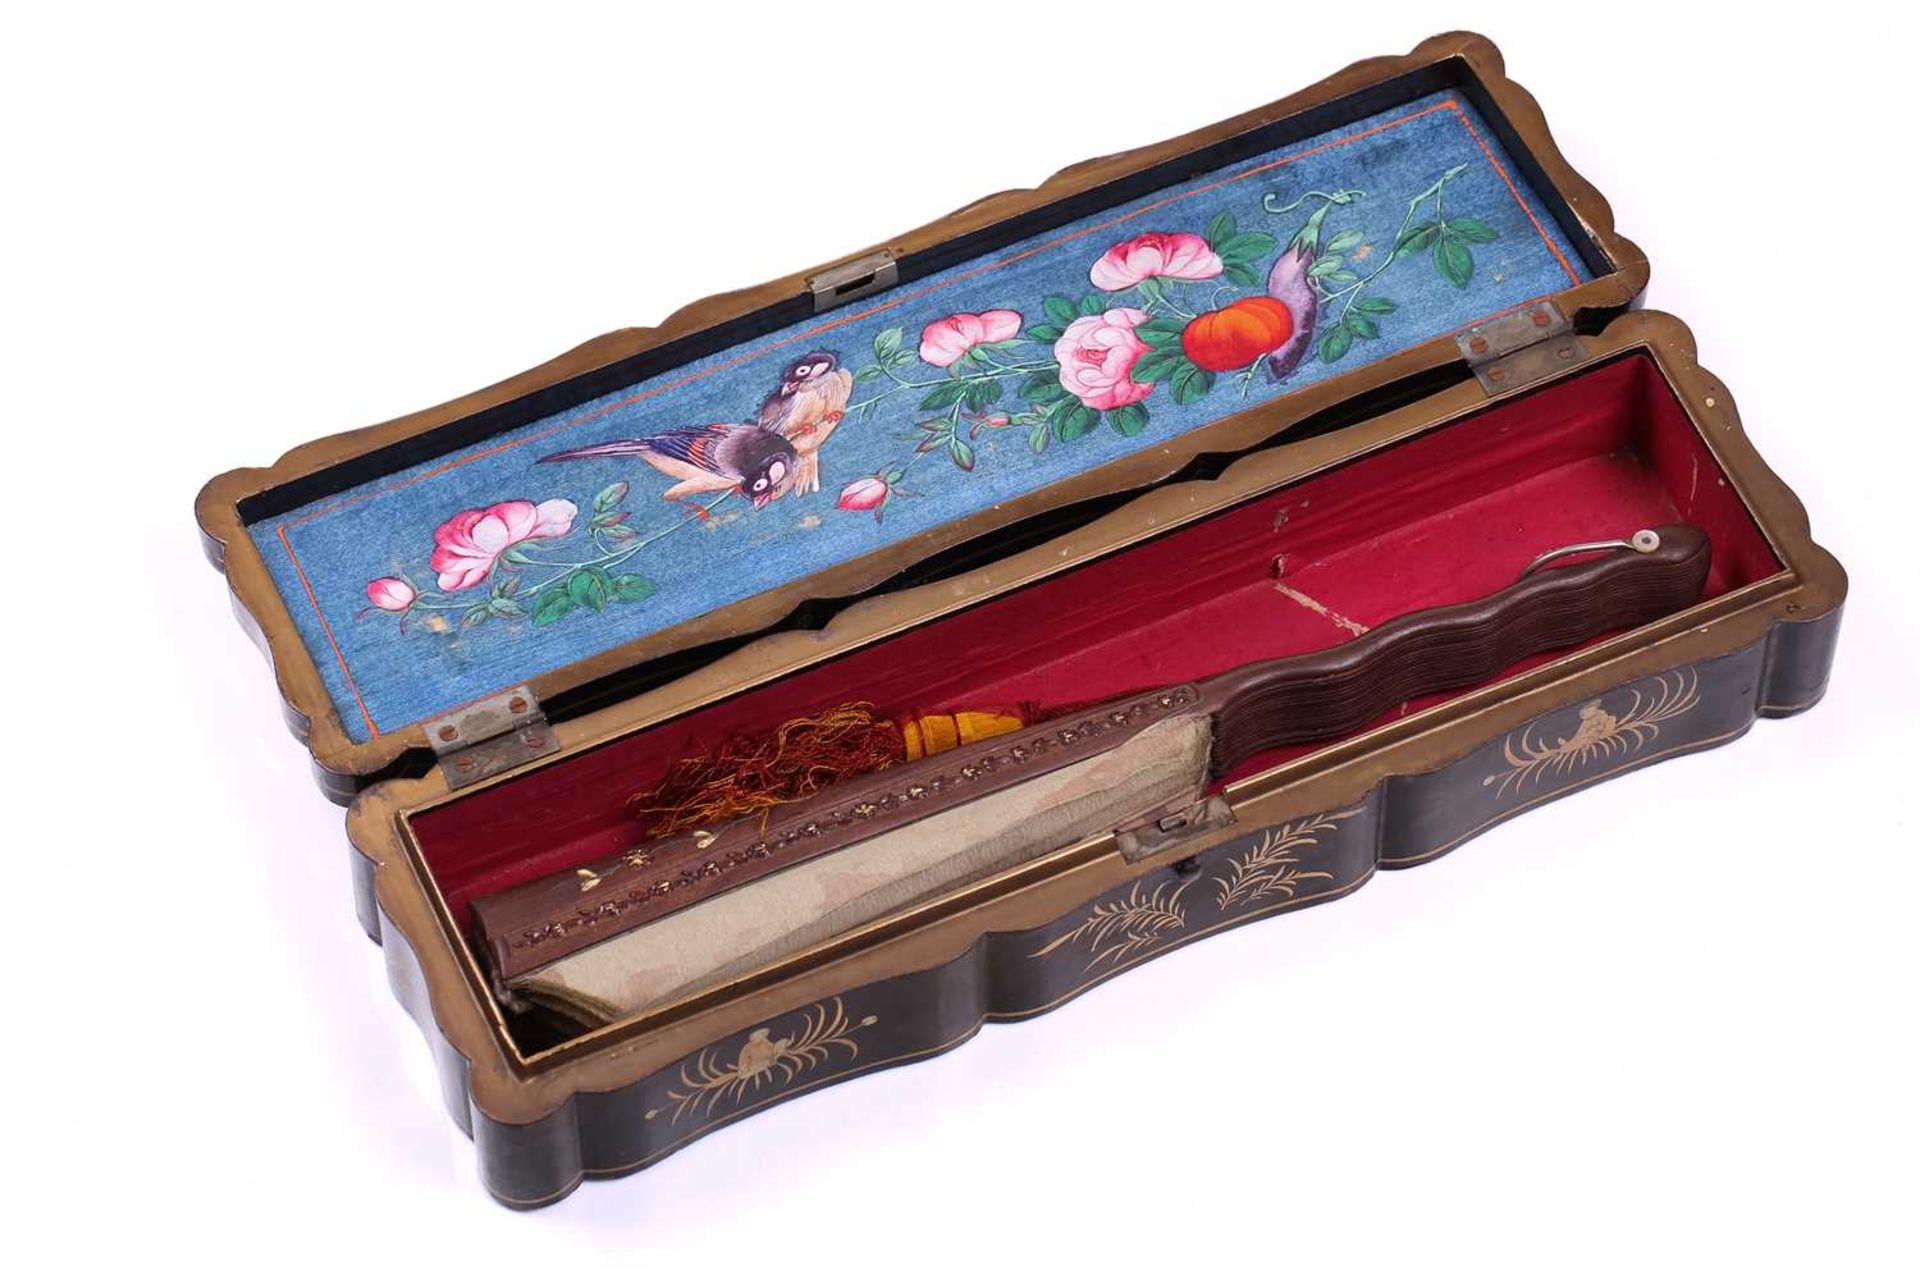 A 19th-century Chinese black and gilt lacquered fan box, containing a European fan (a/f), the box 36